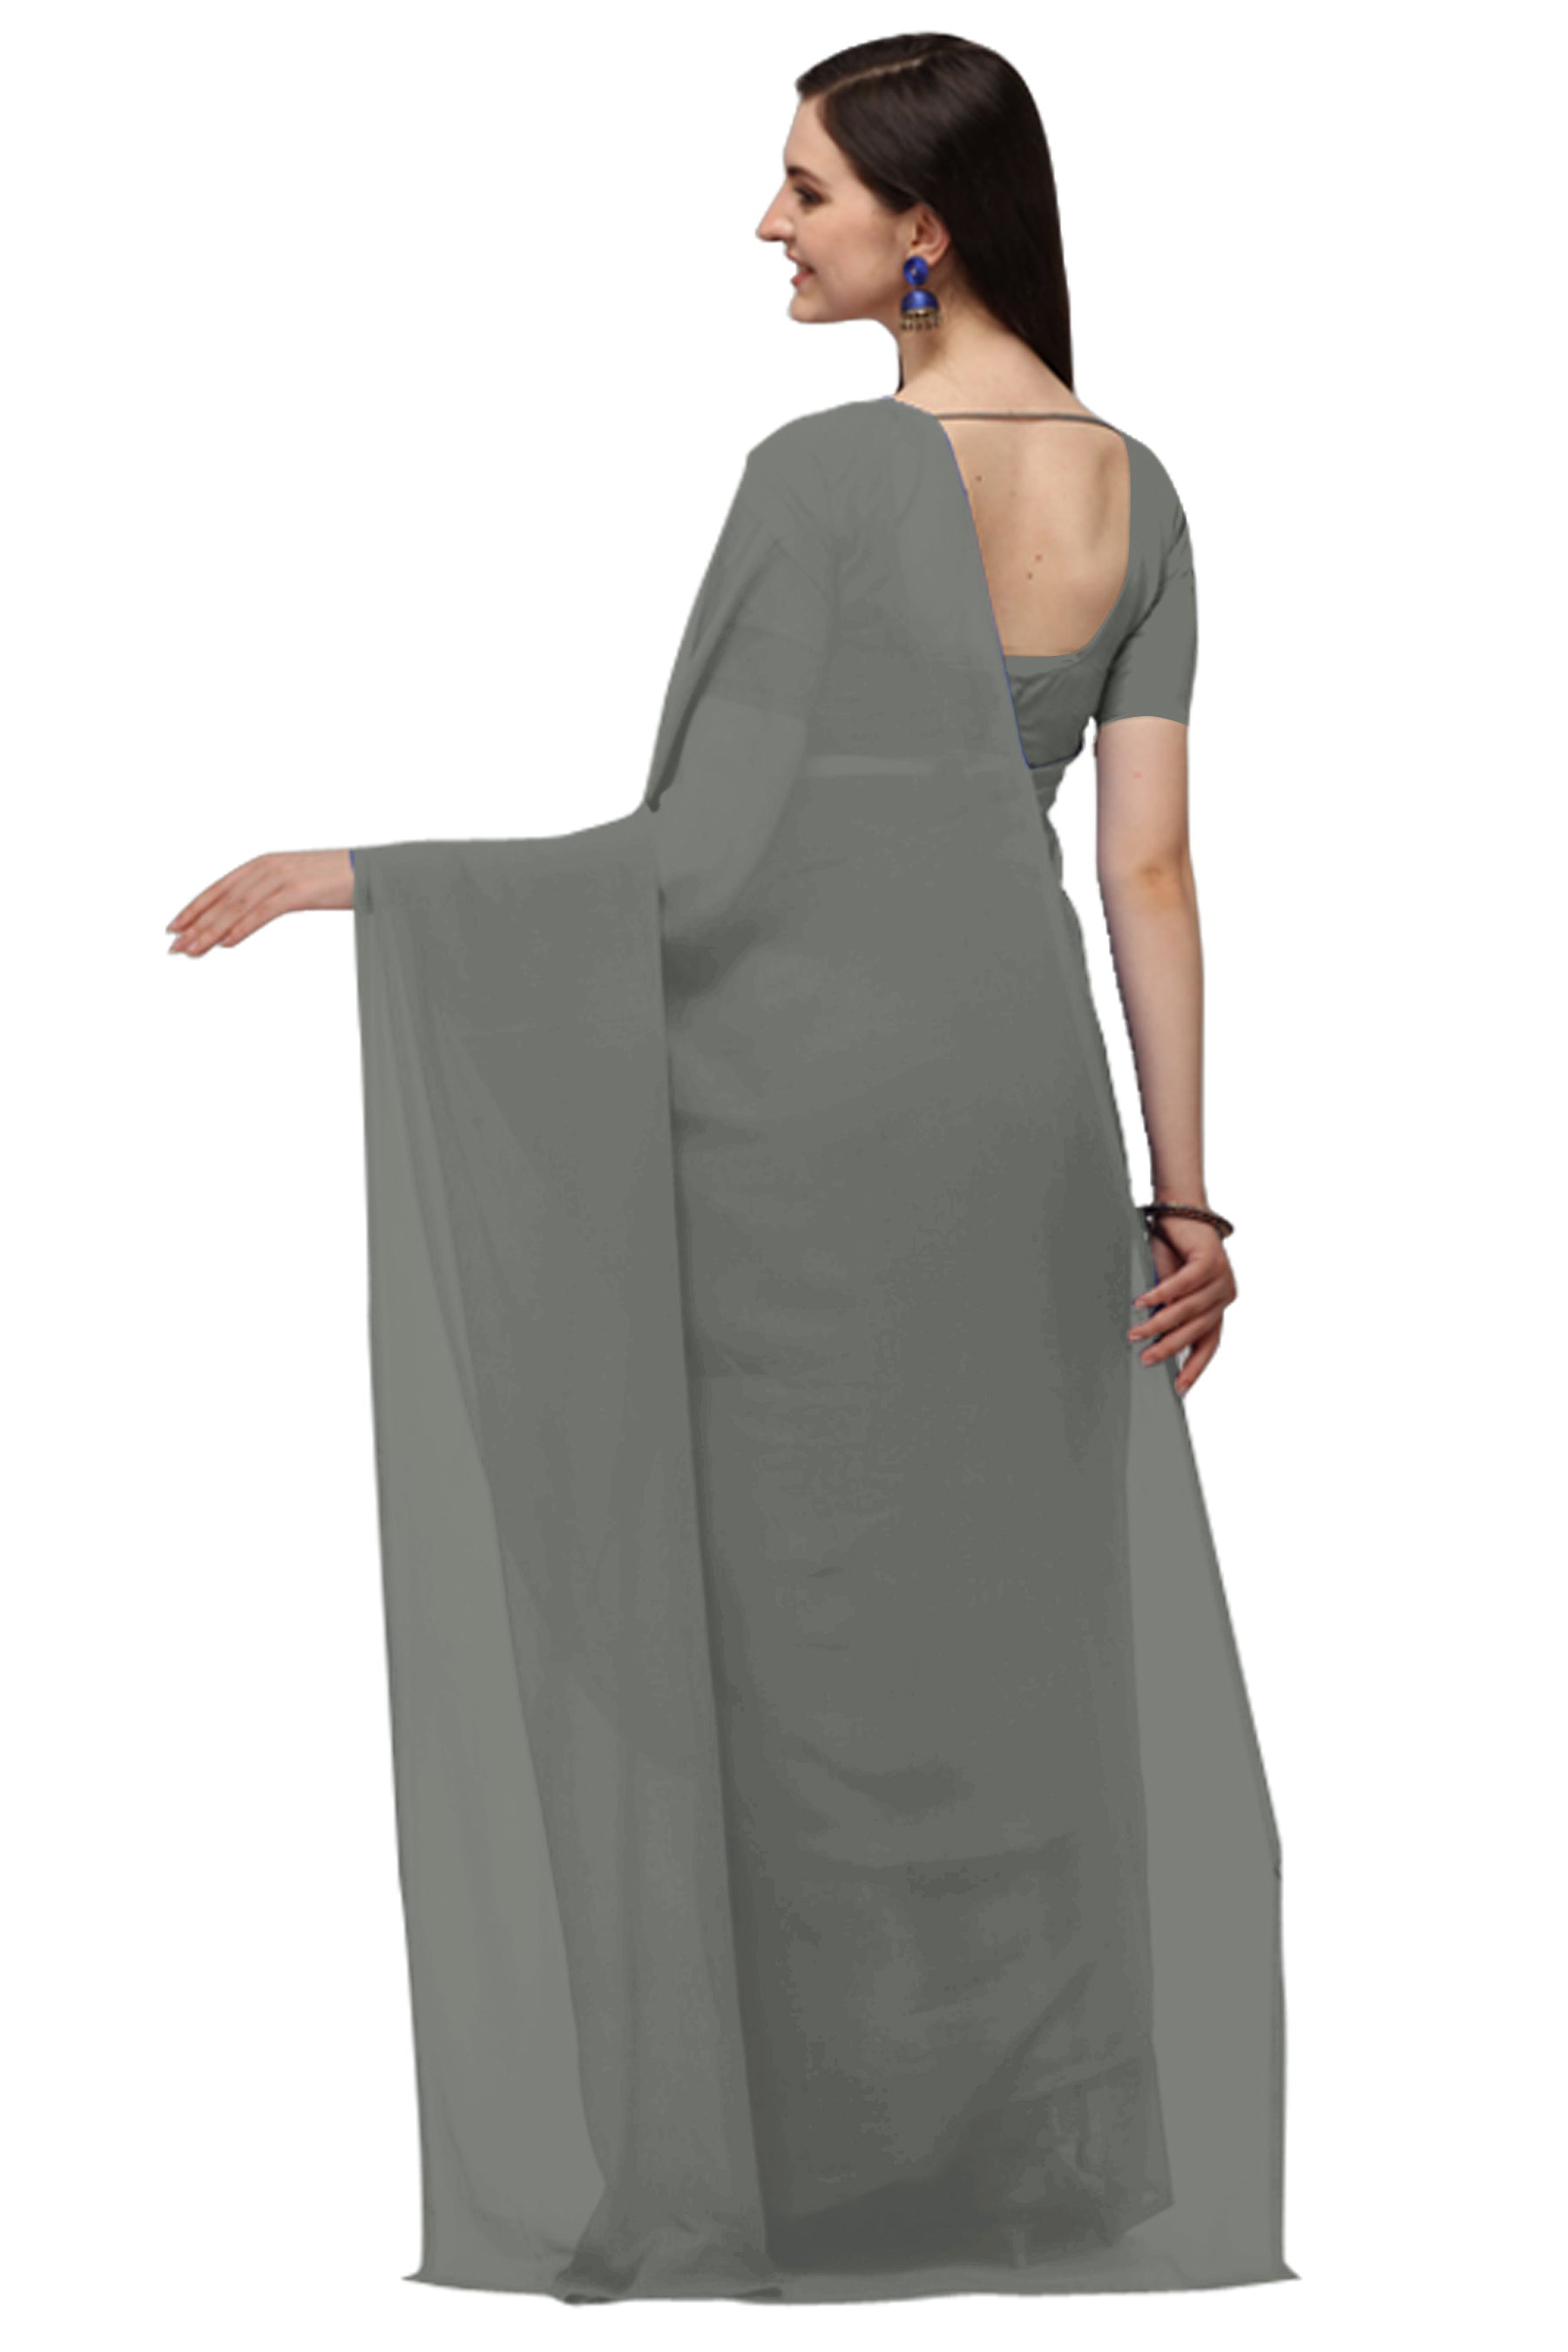 Women's Plain Woven Daily Wear  Formal Georgette Sari With Blouse Piece (Grey) - NIMIDHYA